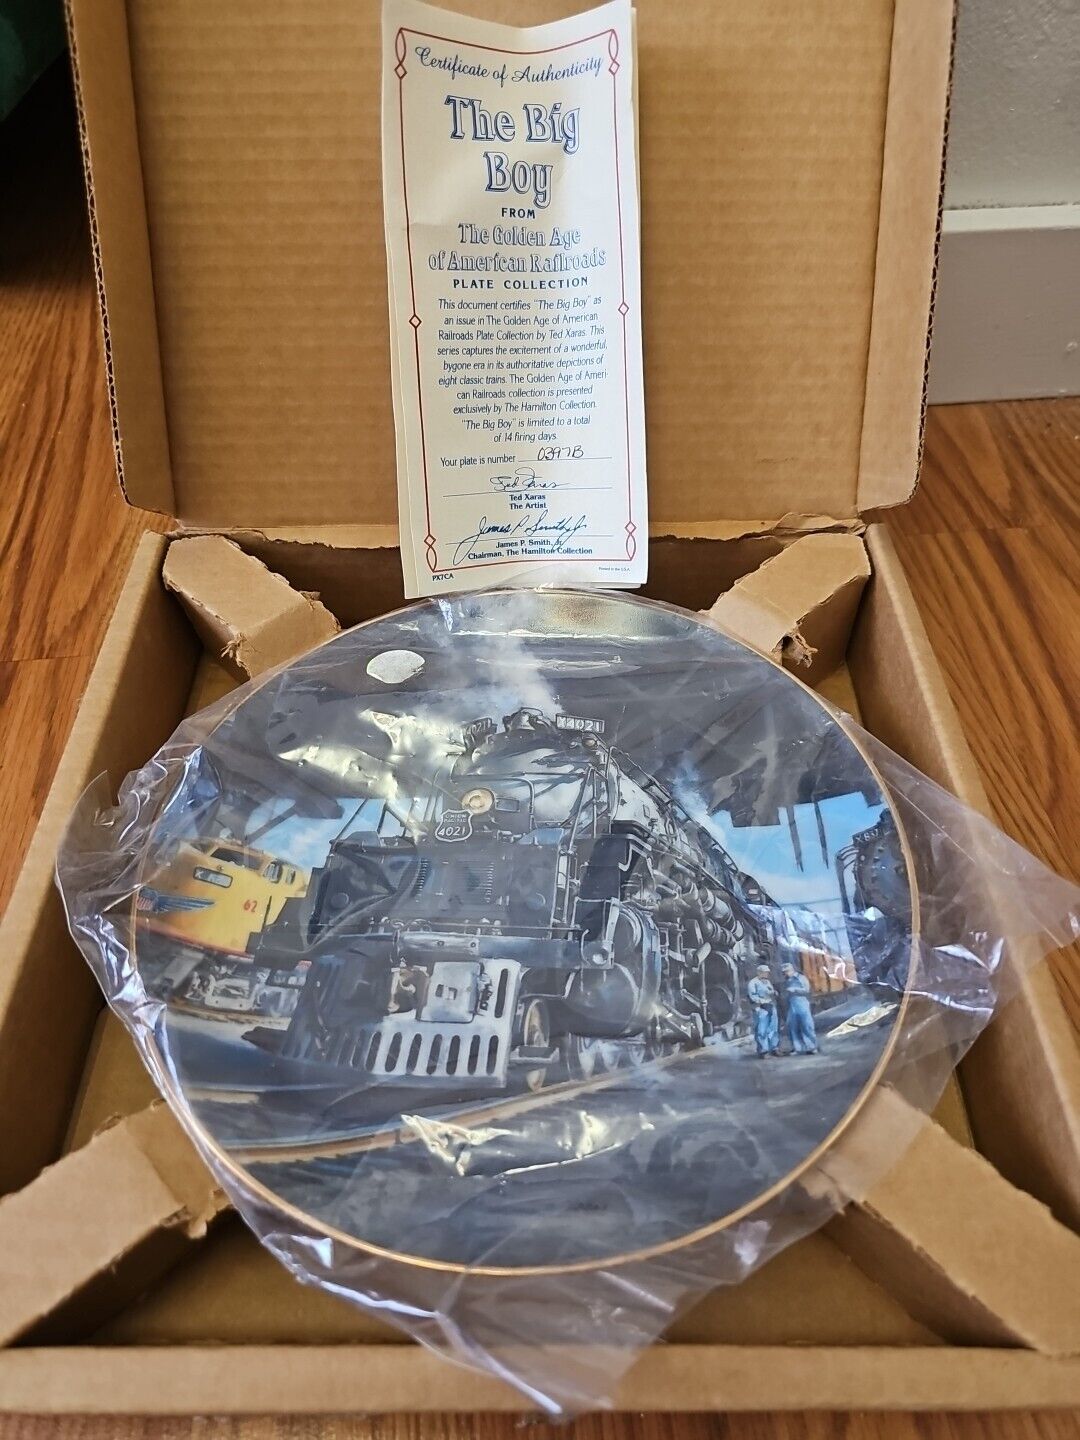 1991 THE BIG BOY The Golden Age of American Railroads Series Plate by Hamilton